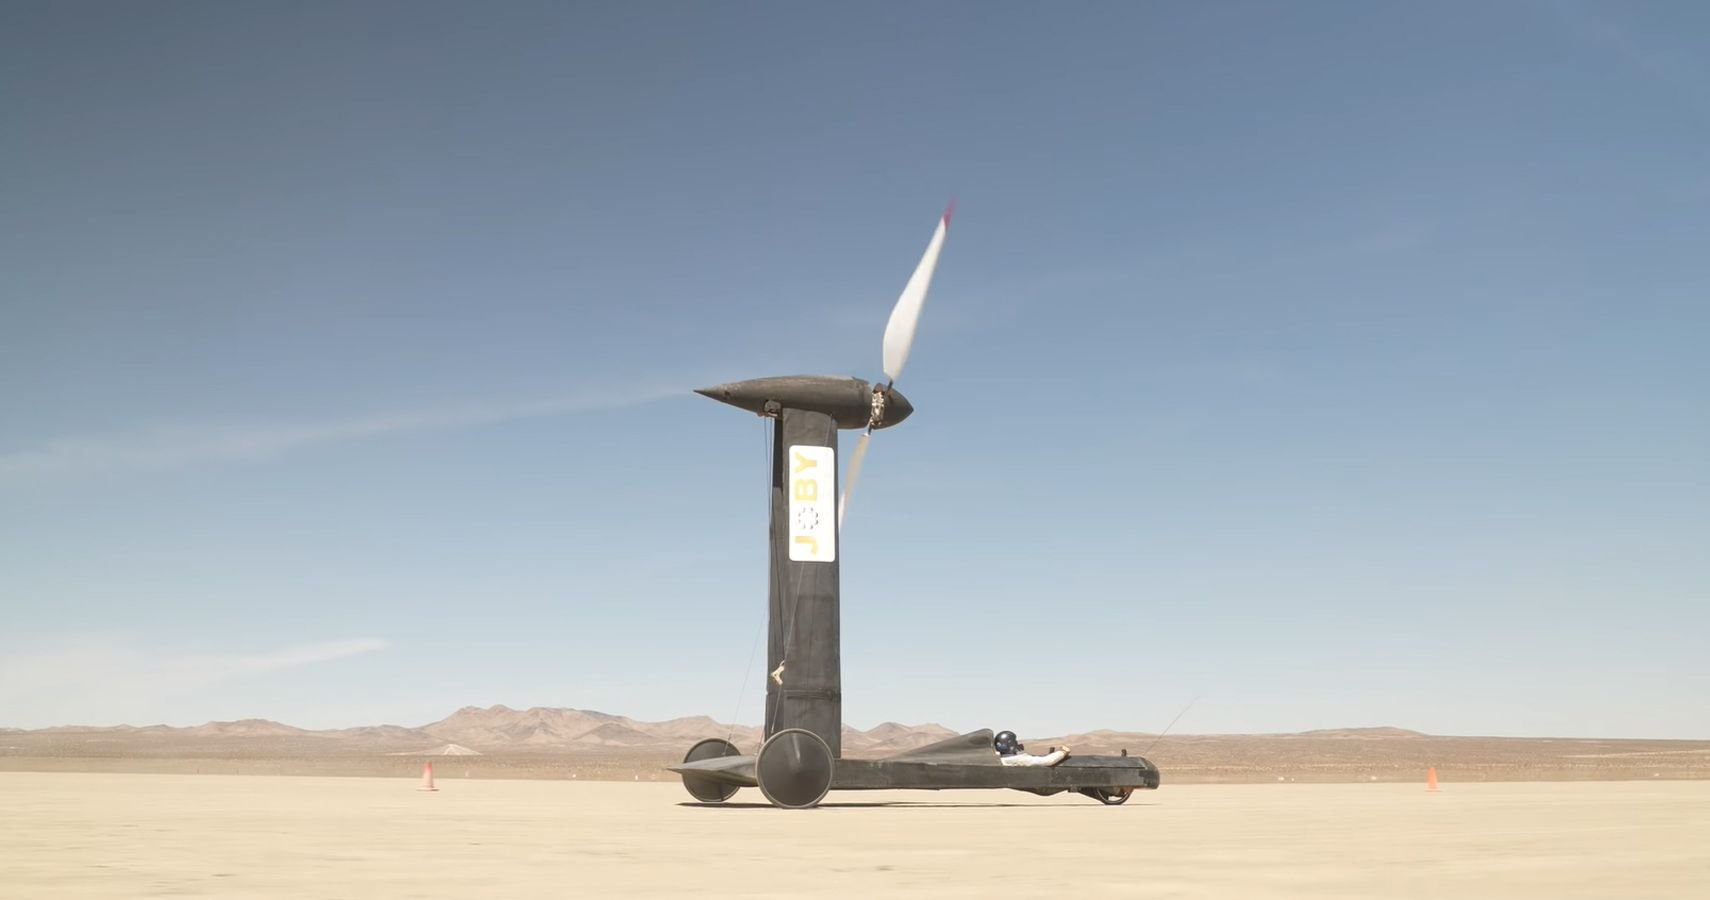 The Blackbird Wind Rover: The Most Counterintuitive Machine That Actually Works